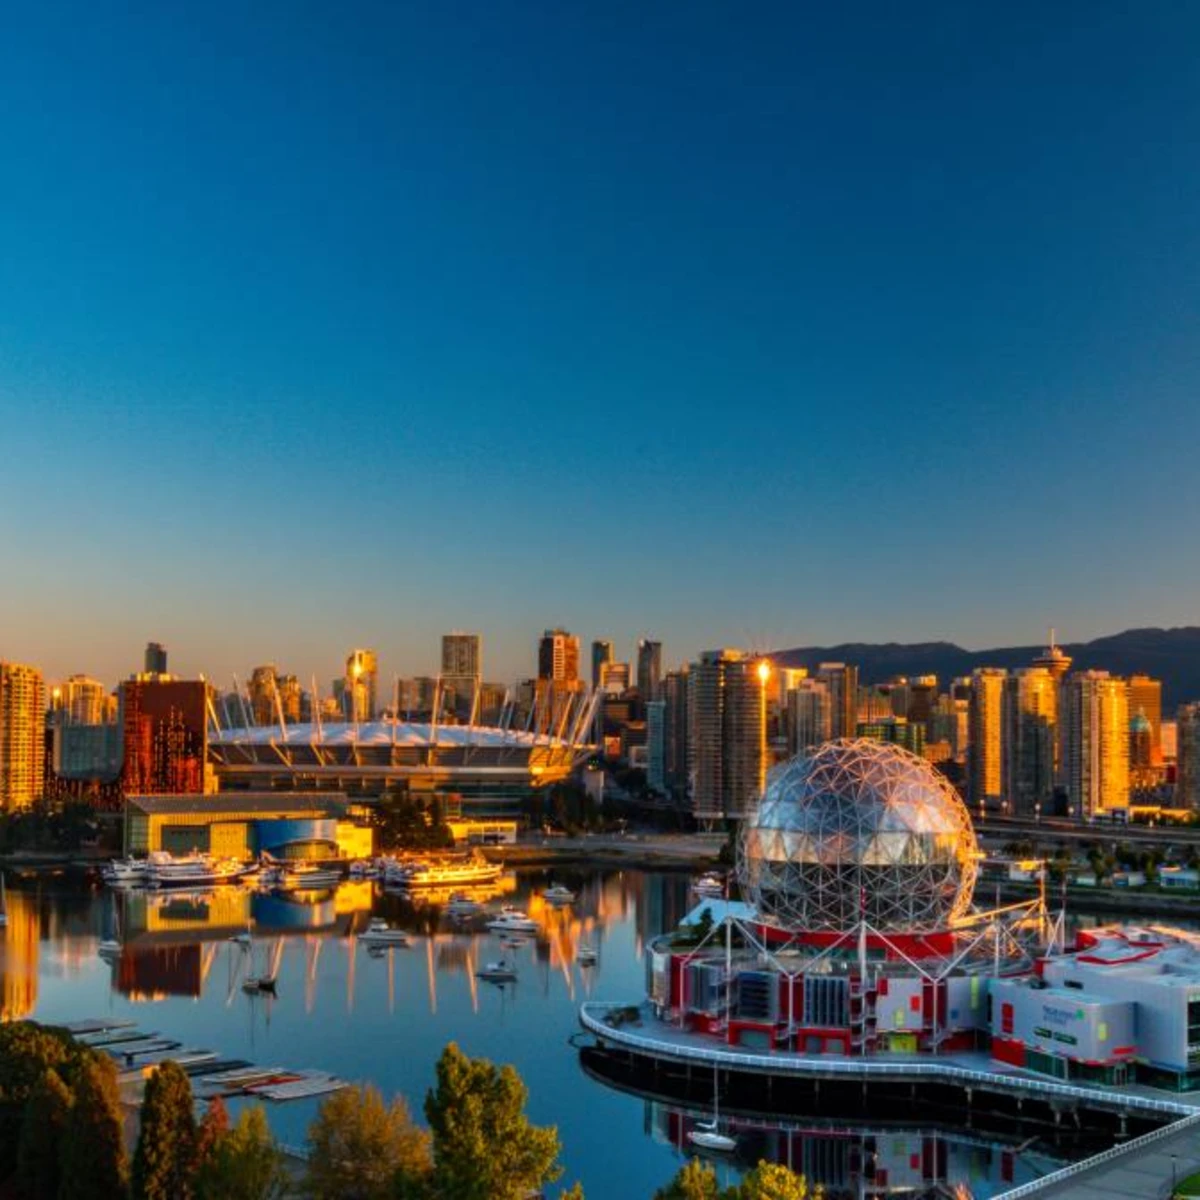 Vancouver skyline towards the end of sunset with globe.